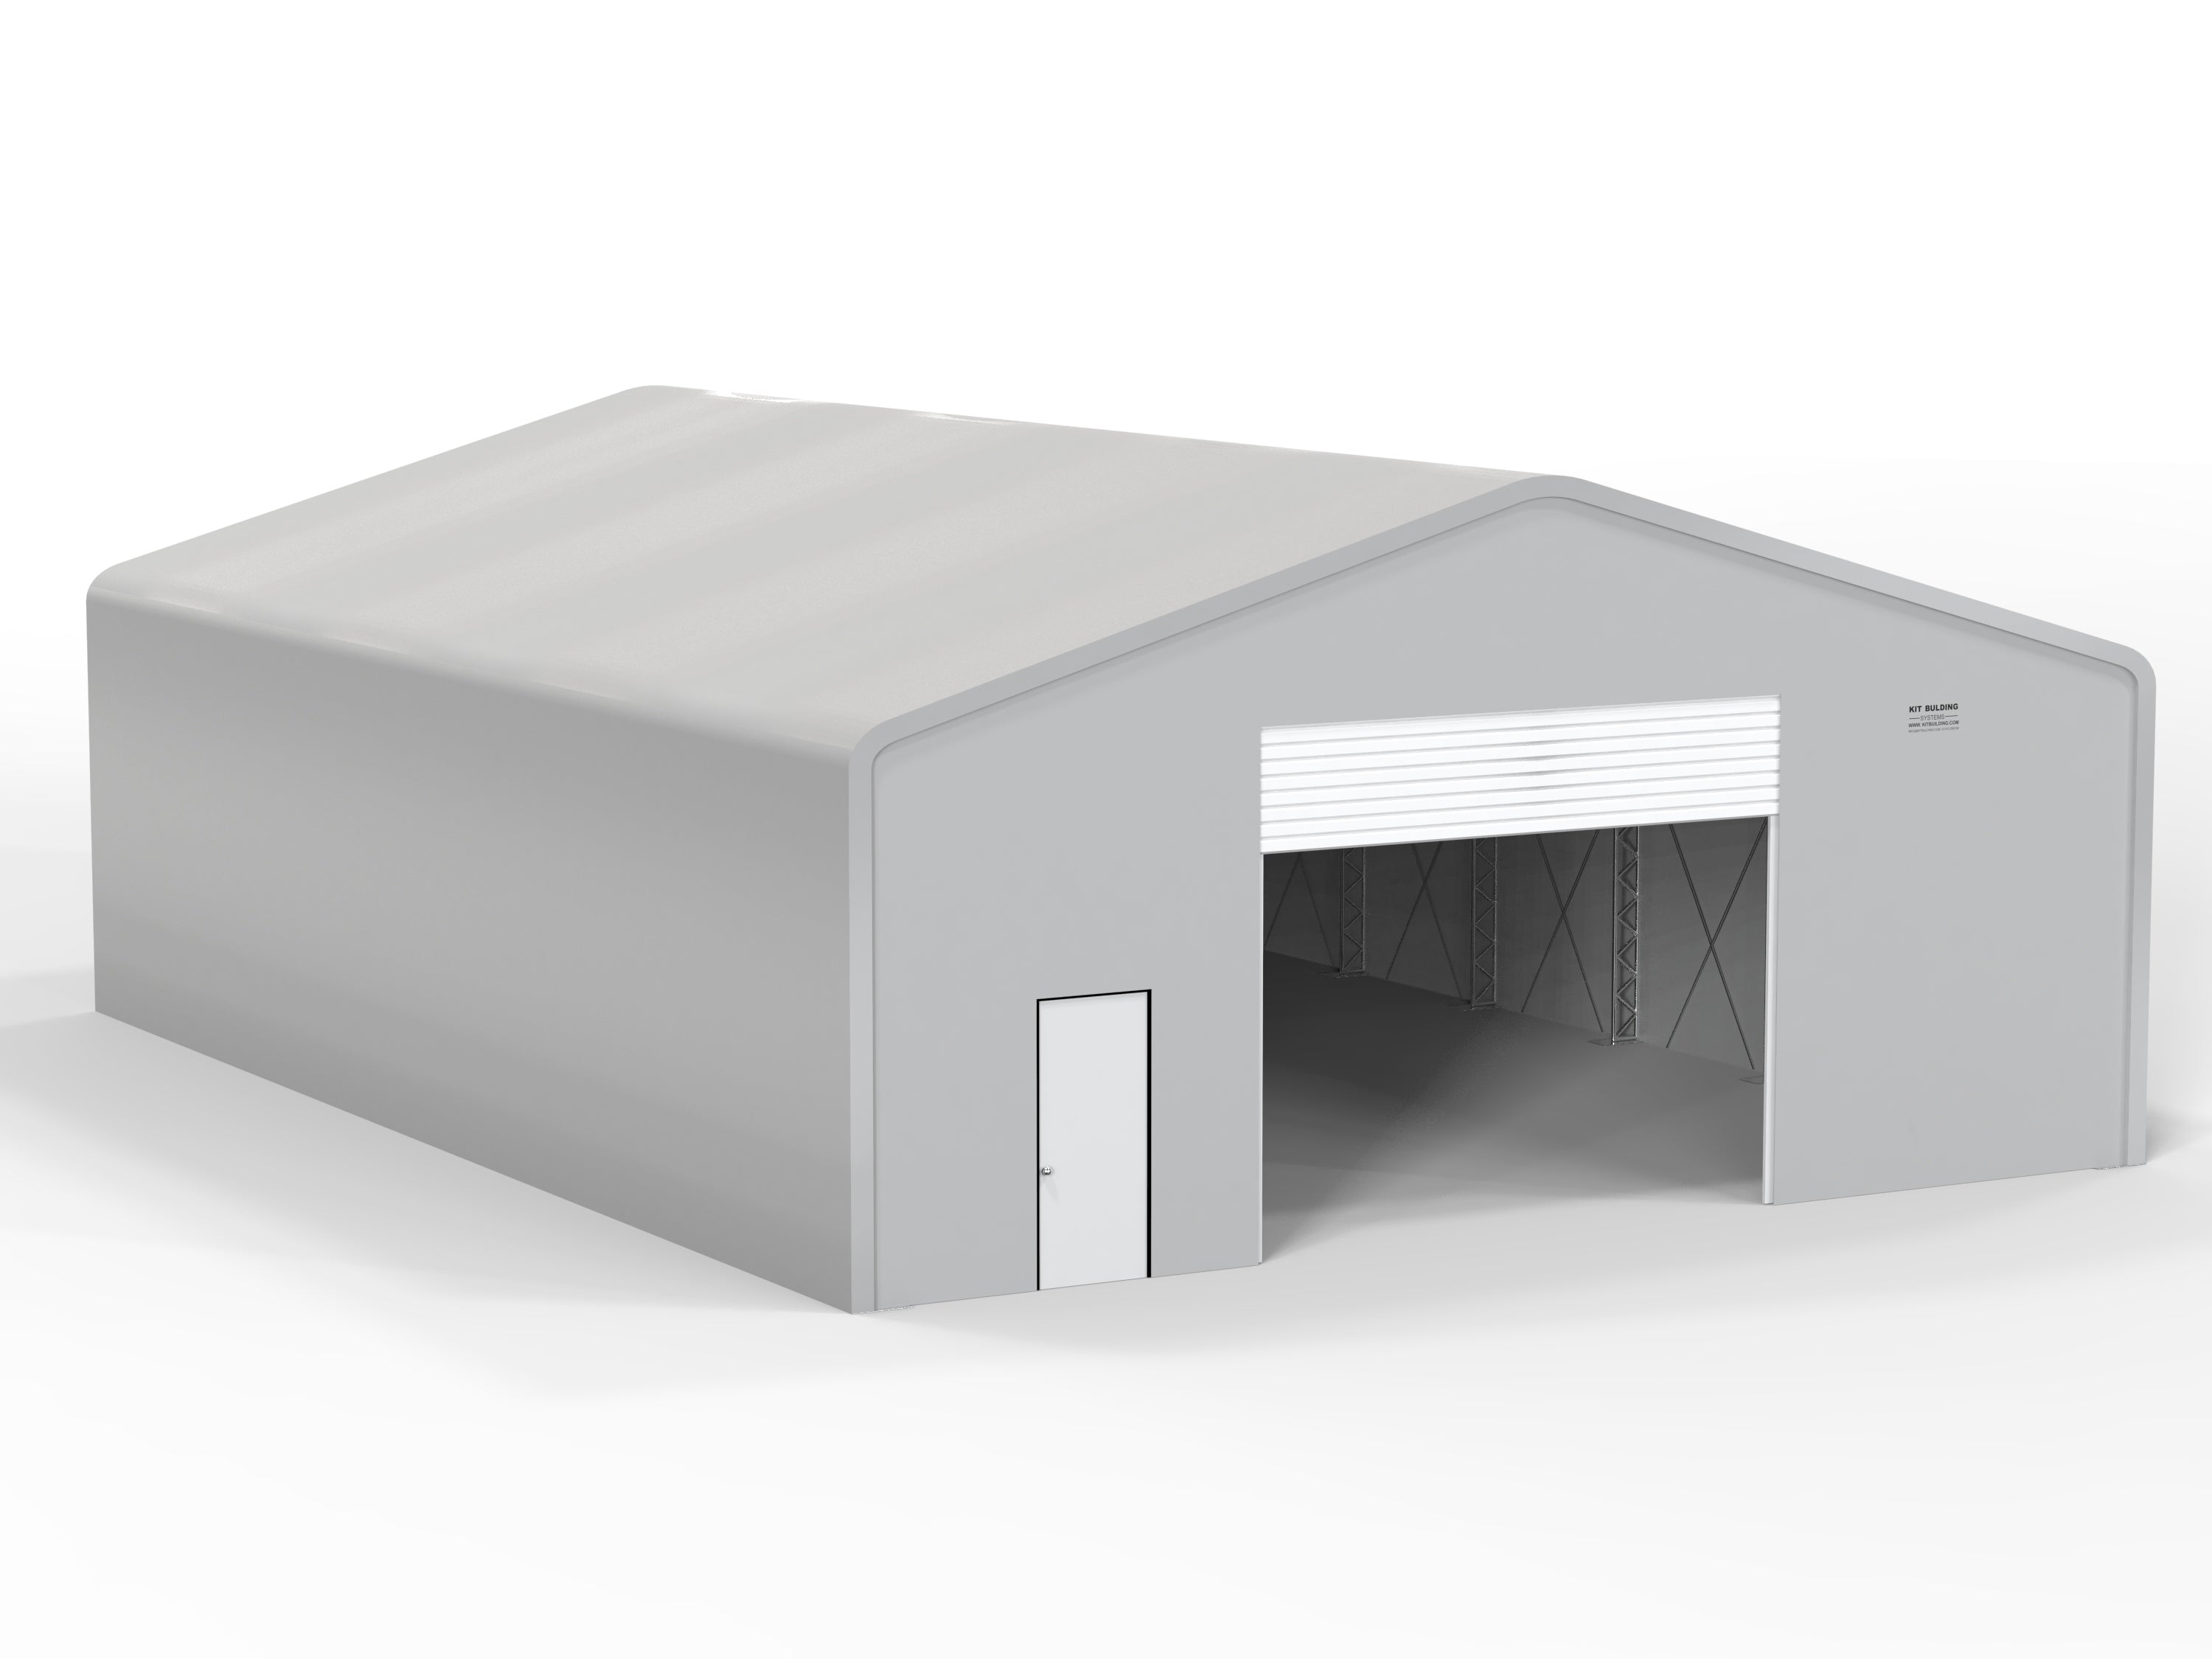 Double Truss PVC temporary storage building - Grey - Automatic Roller shutter